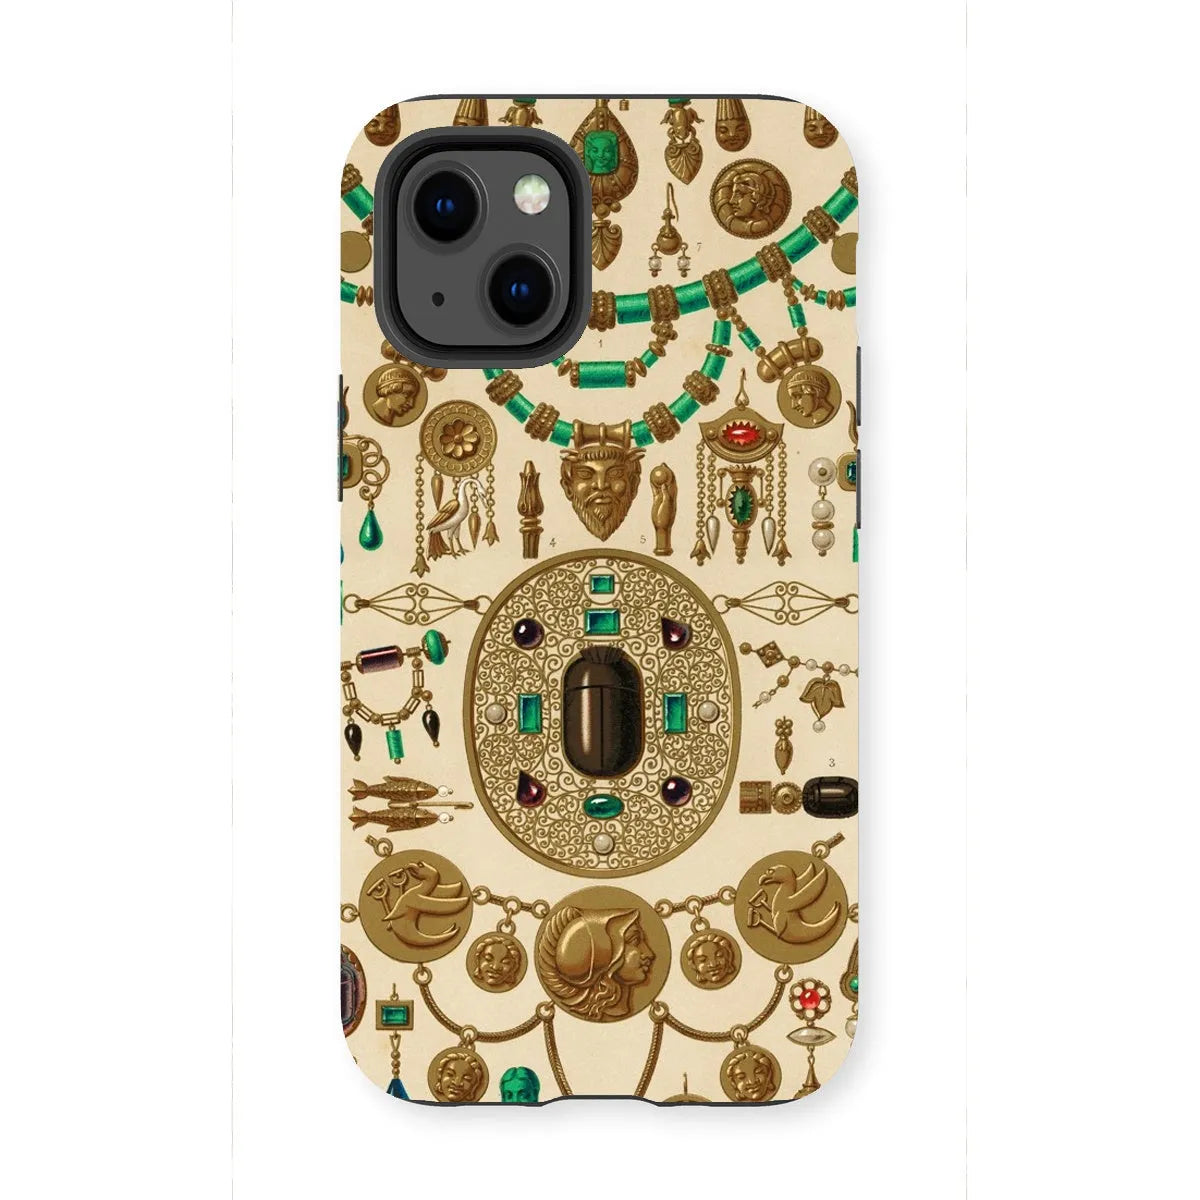 Etruscan Jewelry By Auguste Racinet Art Phone Case - Iphone 13 Mini / Matte - Mobile Phone Cases - Aesthetic Art